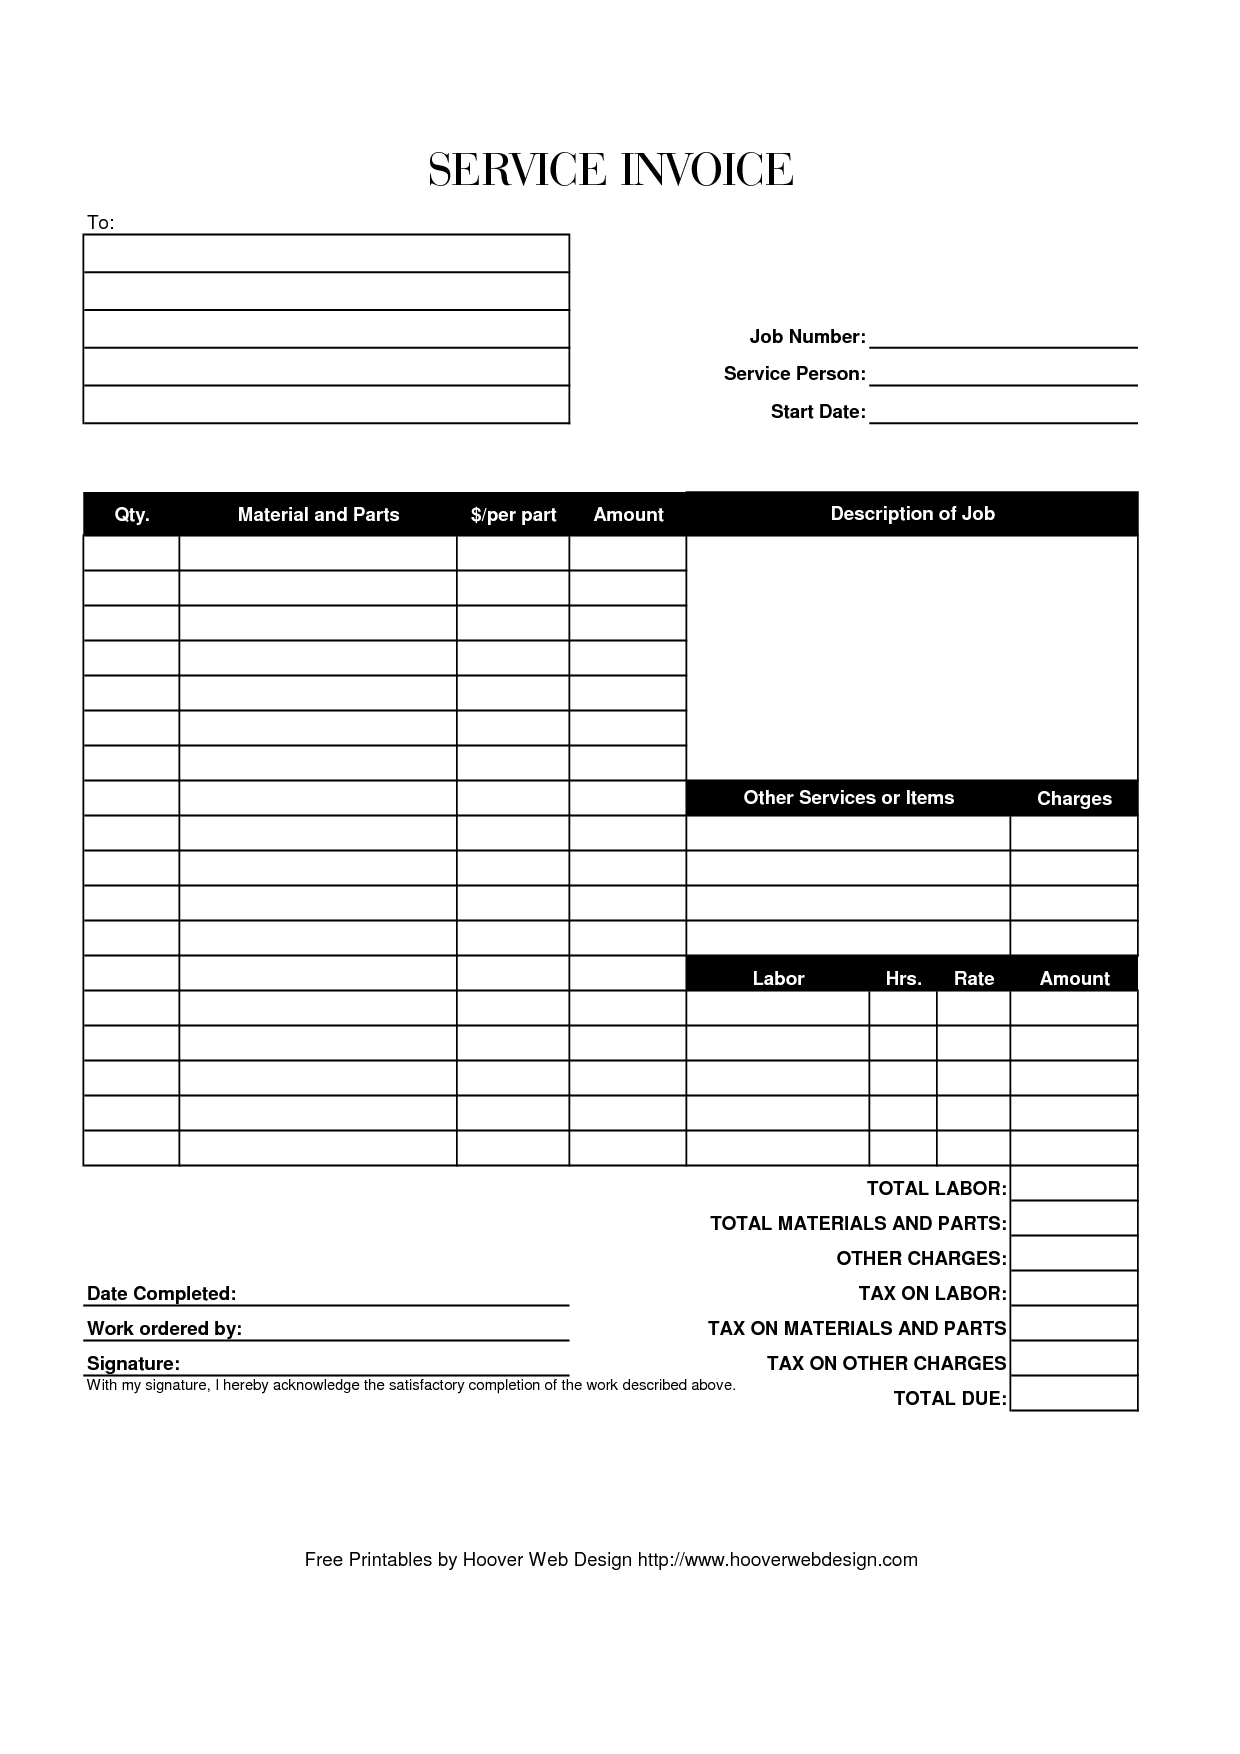 free printable service invoices invoice template ideas